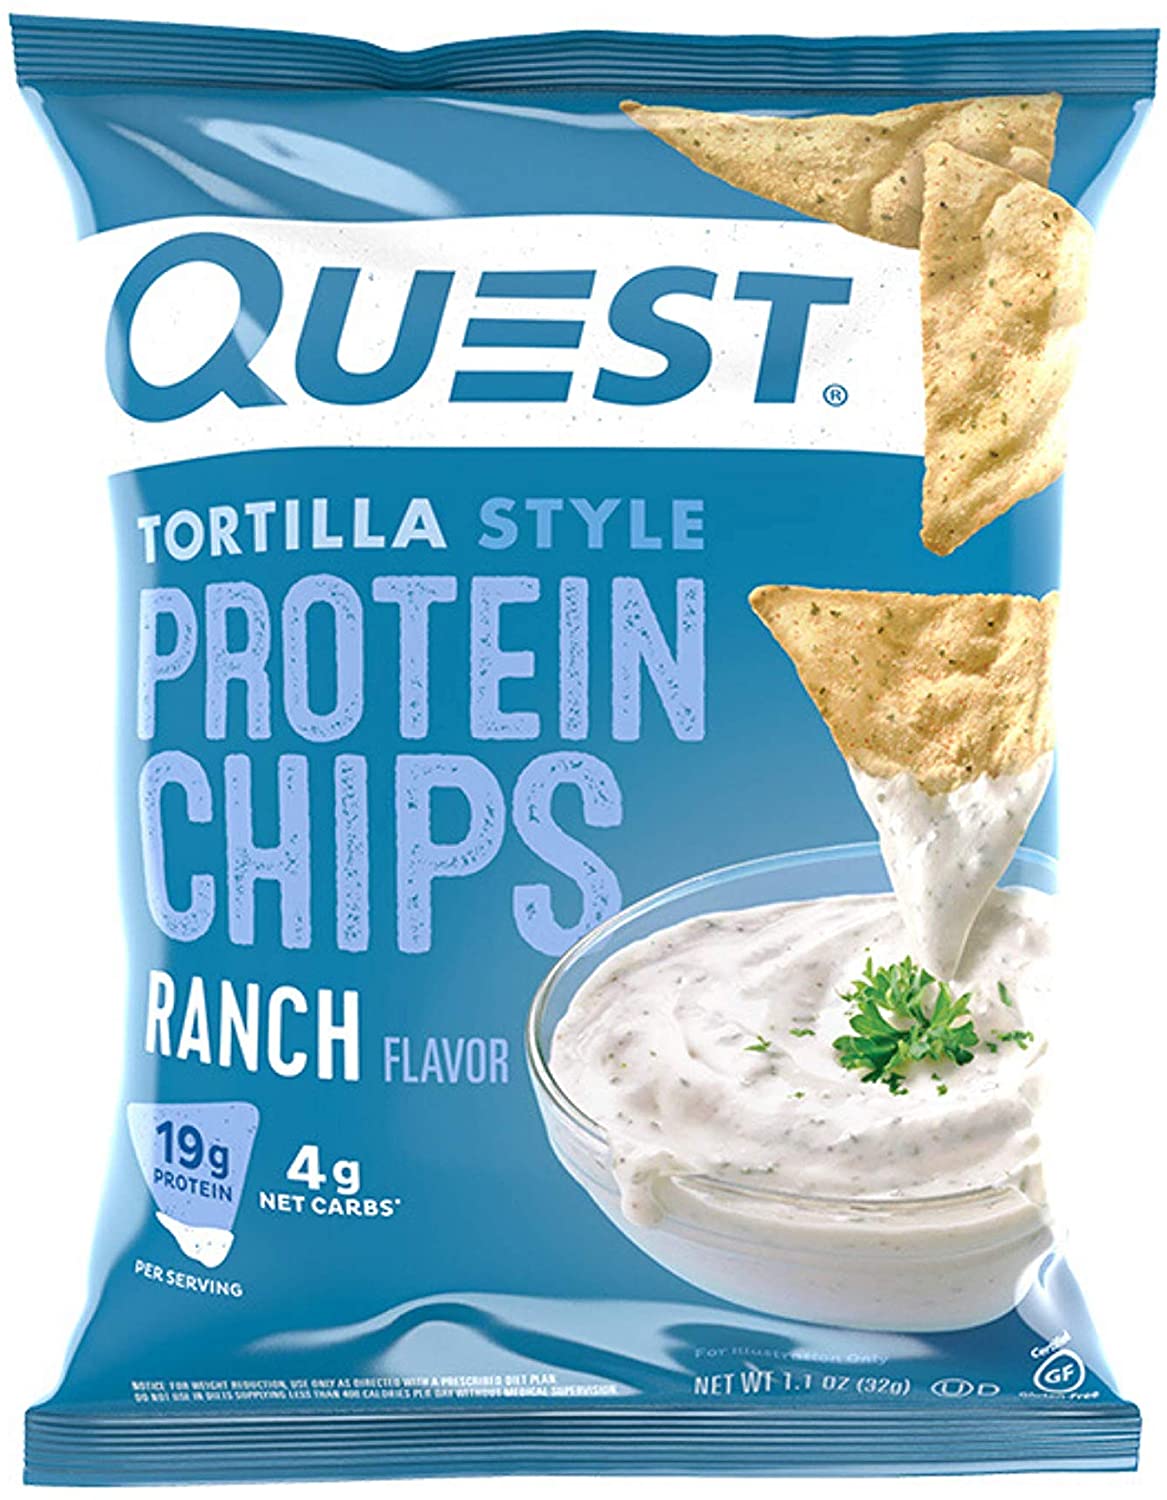 Quest Nutrition Tortilla Style Protein Chips Ranch Baked Pack of 12